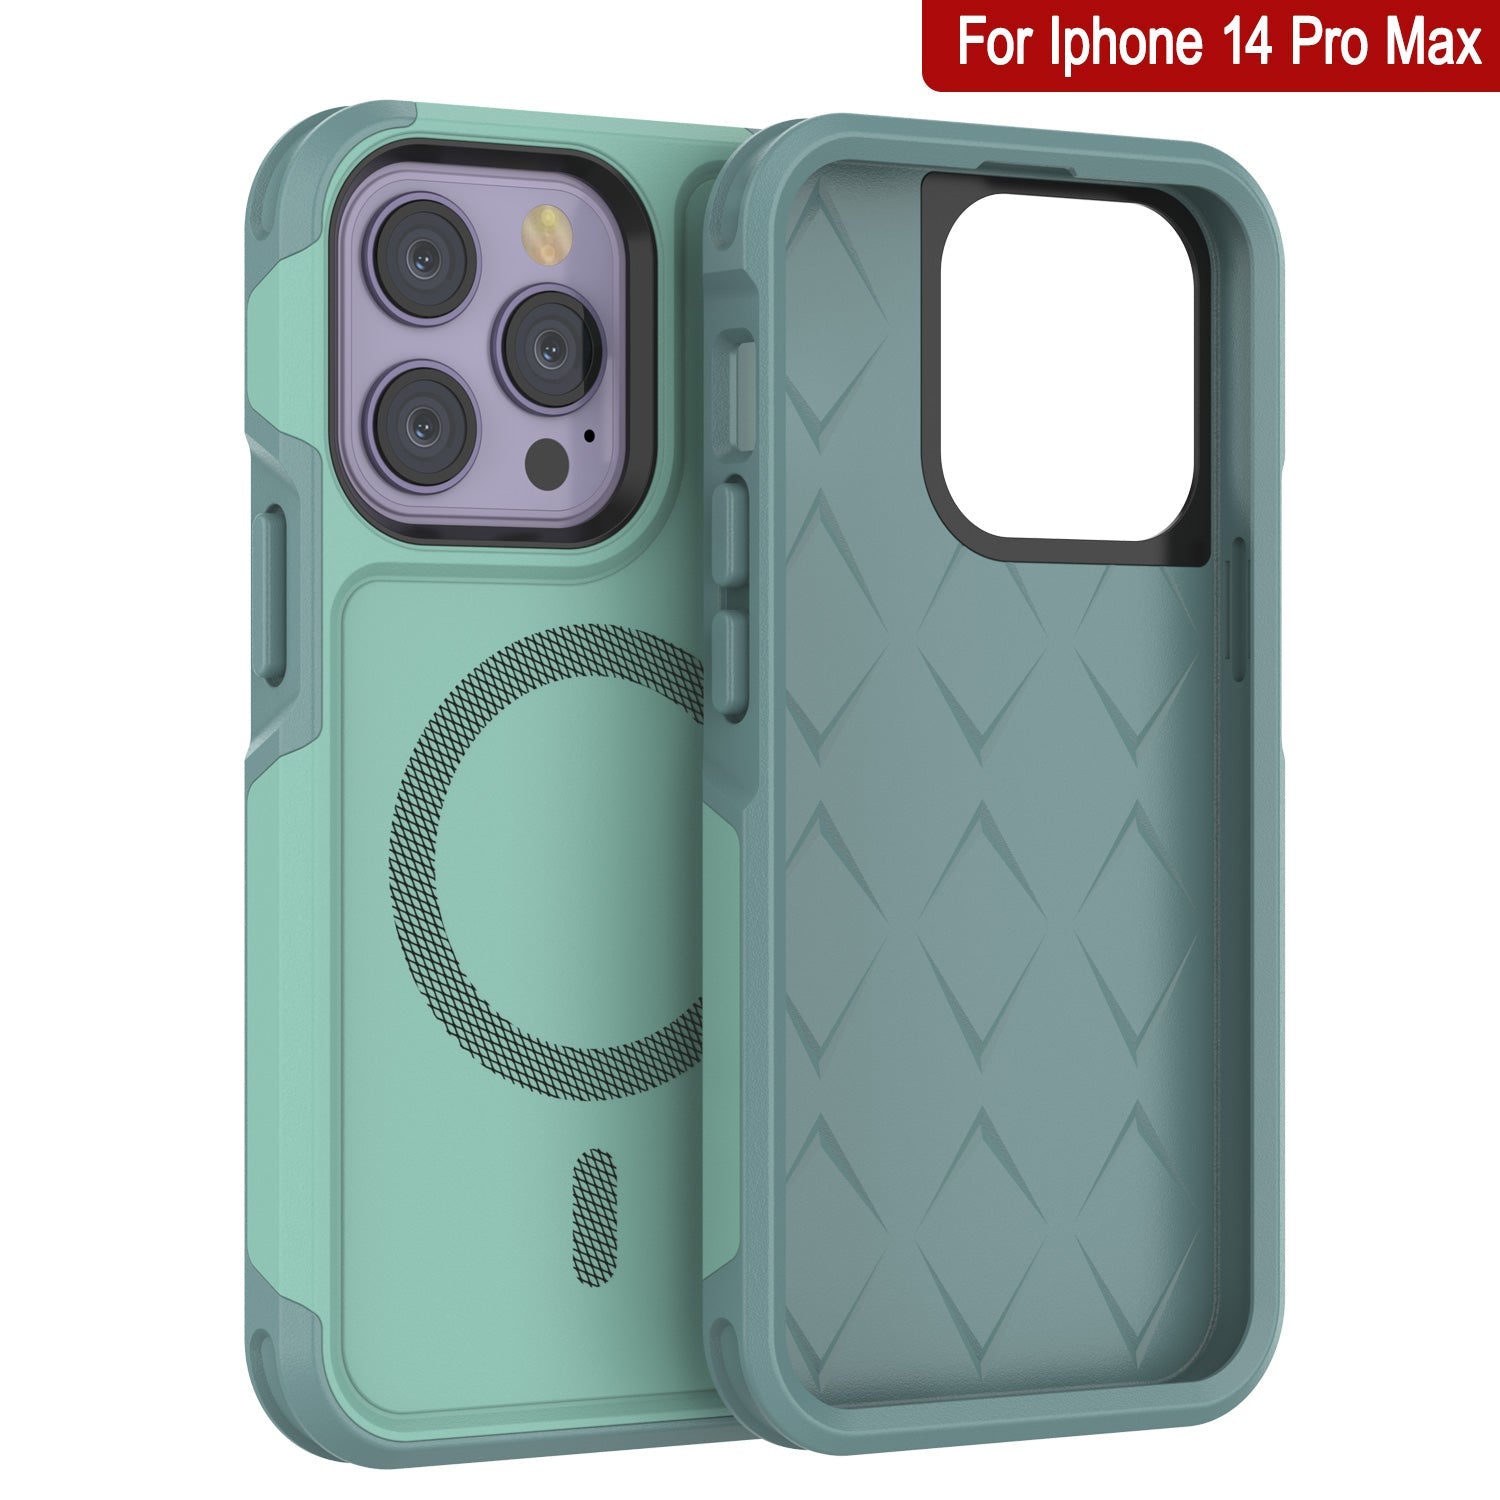 PunkCase iPhone 14 Pro Max Case, [Spartan 2.0 Series] Clear Rugged Heavy Duty Cover W/Built in Screen Protector [Teal]